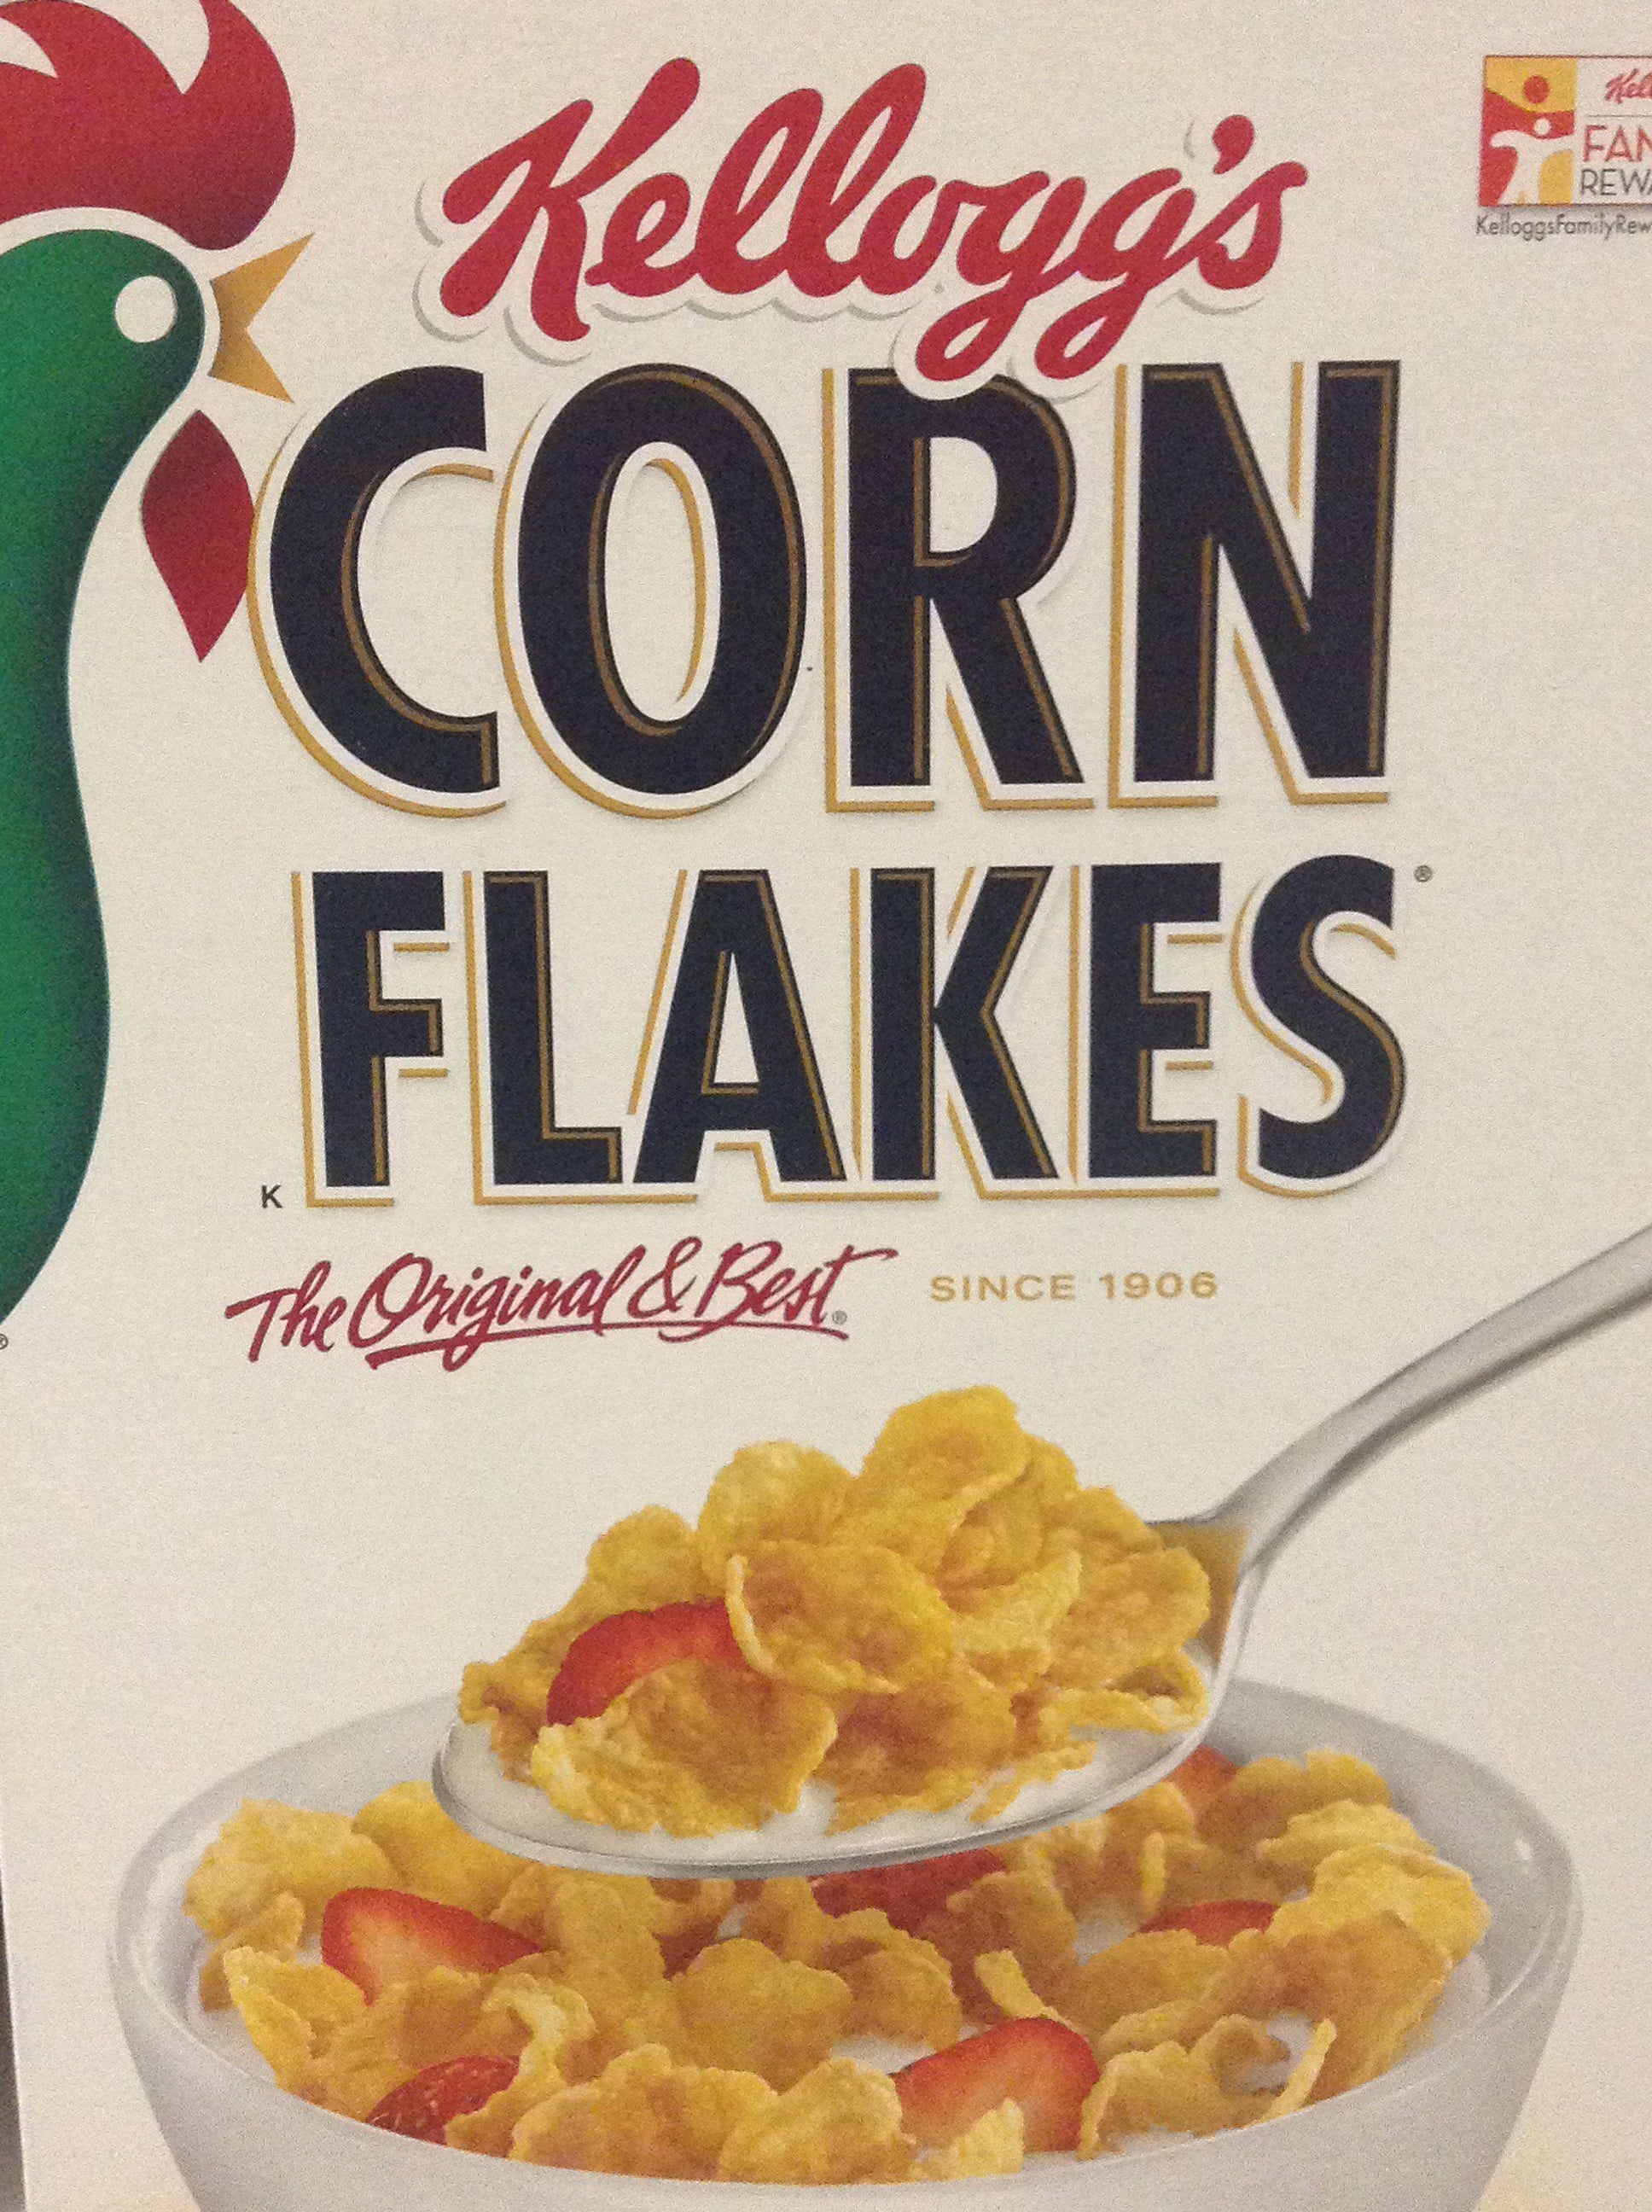 Why were Corn Flakes invented? The origins of the Kellogg's